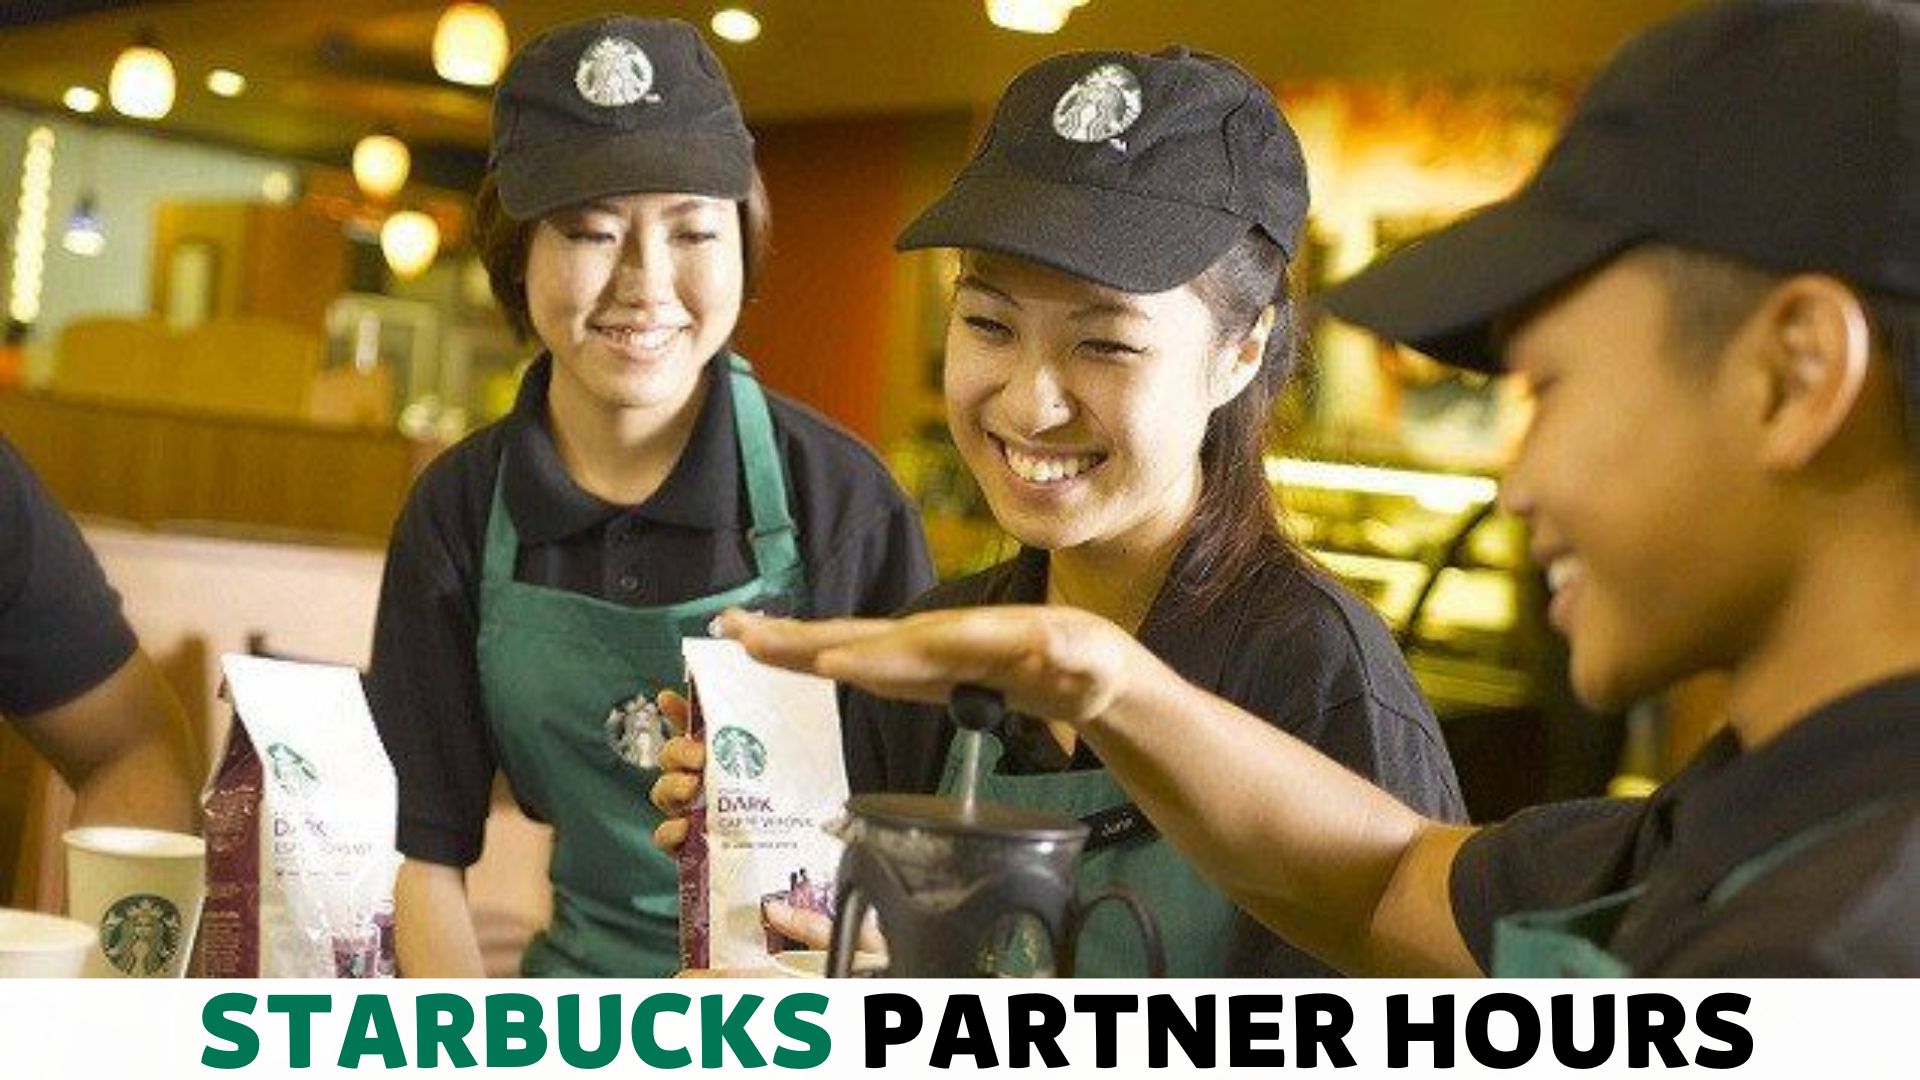 What Makes You a Starbucks Partner